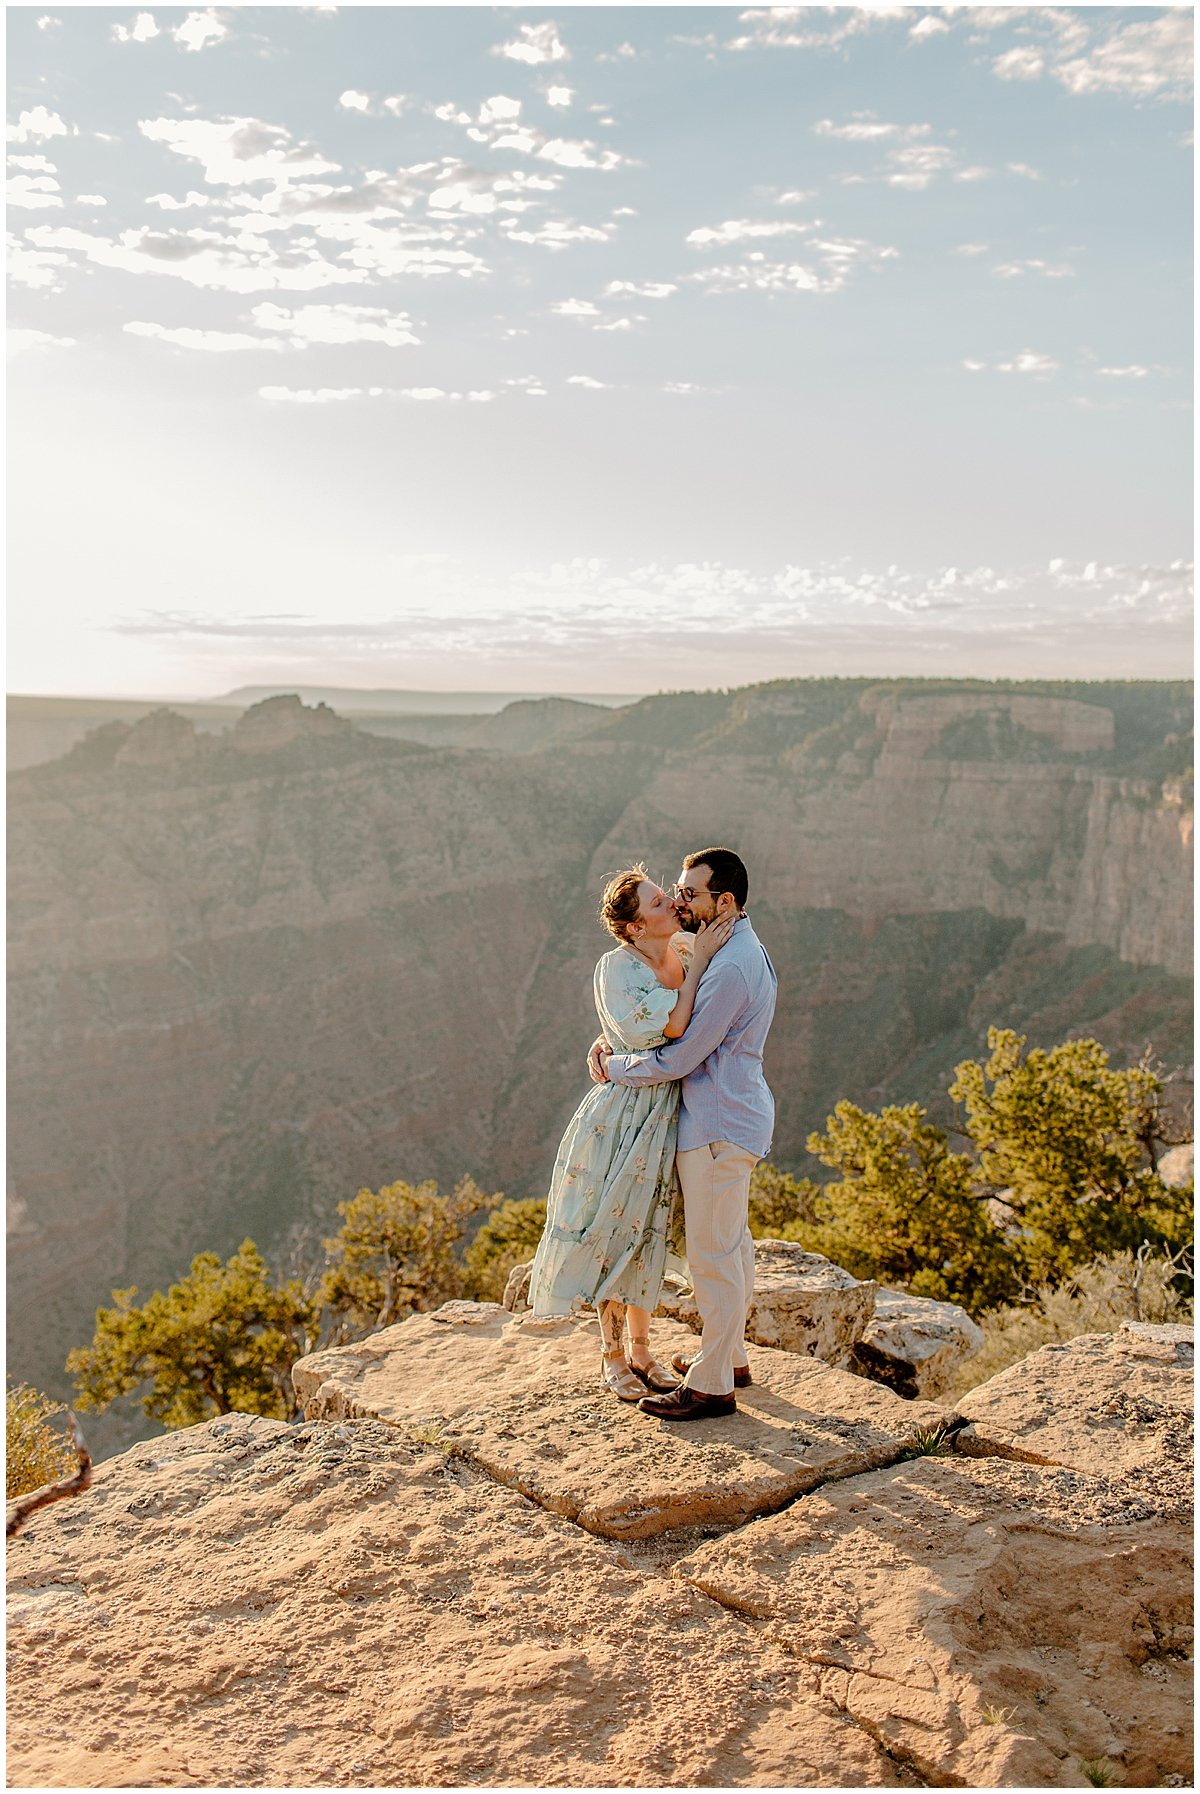  Parnters embrace outdoors by Arizona Couples Photographer 